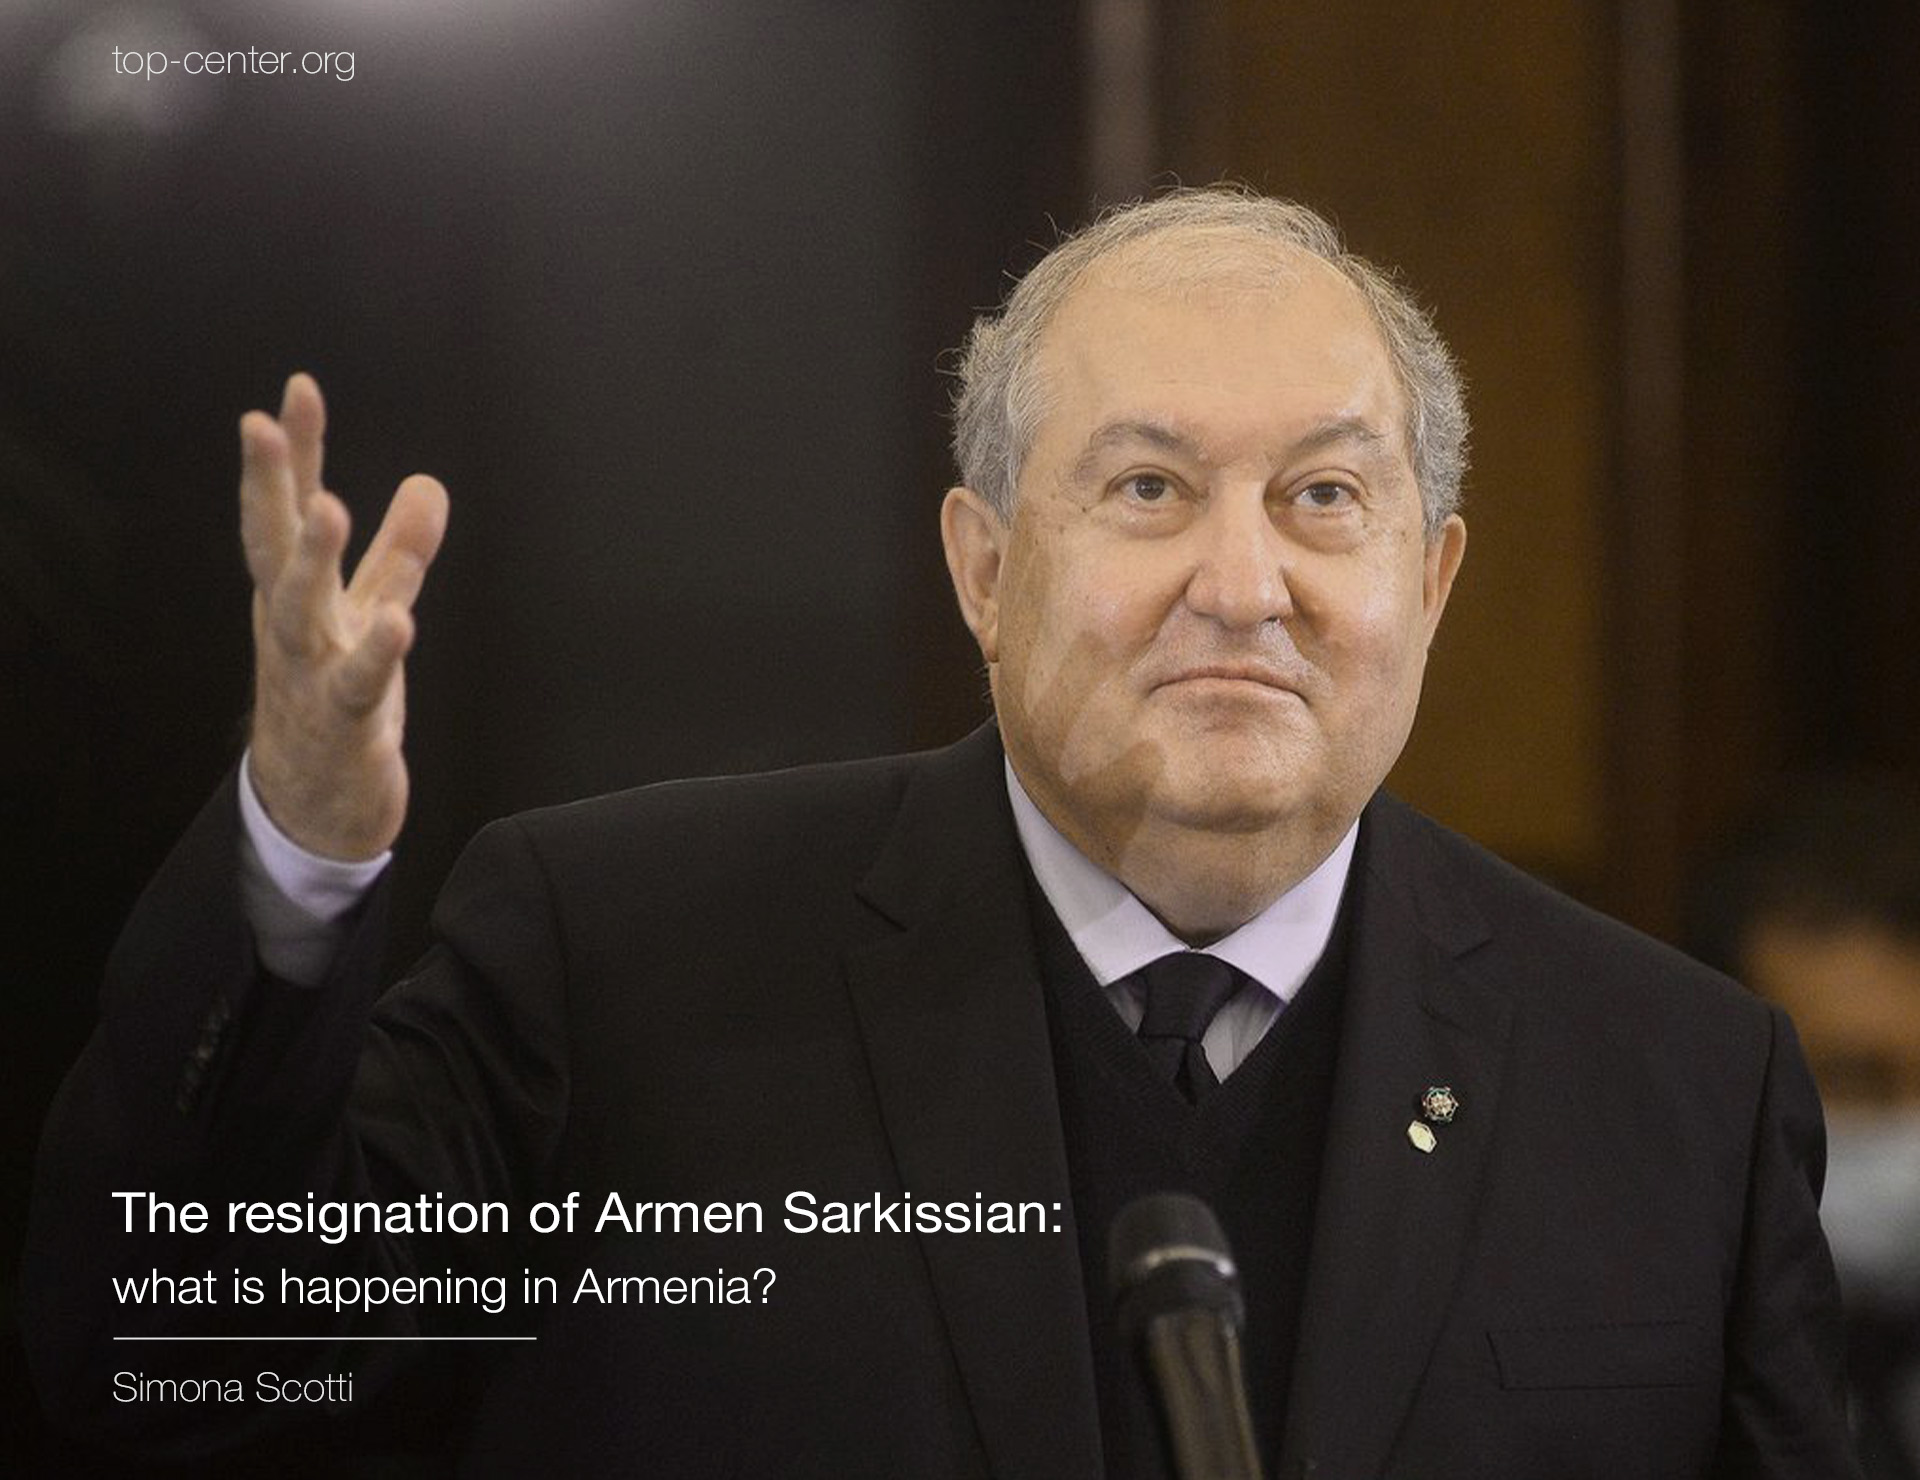 The resignation of Armen Sarkissian: what is happening in Armenia?